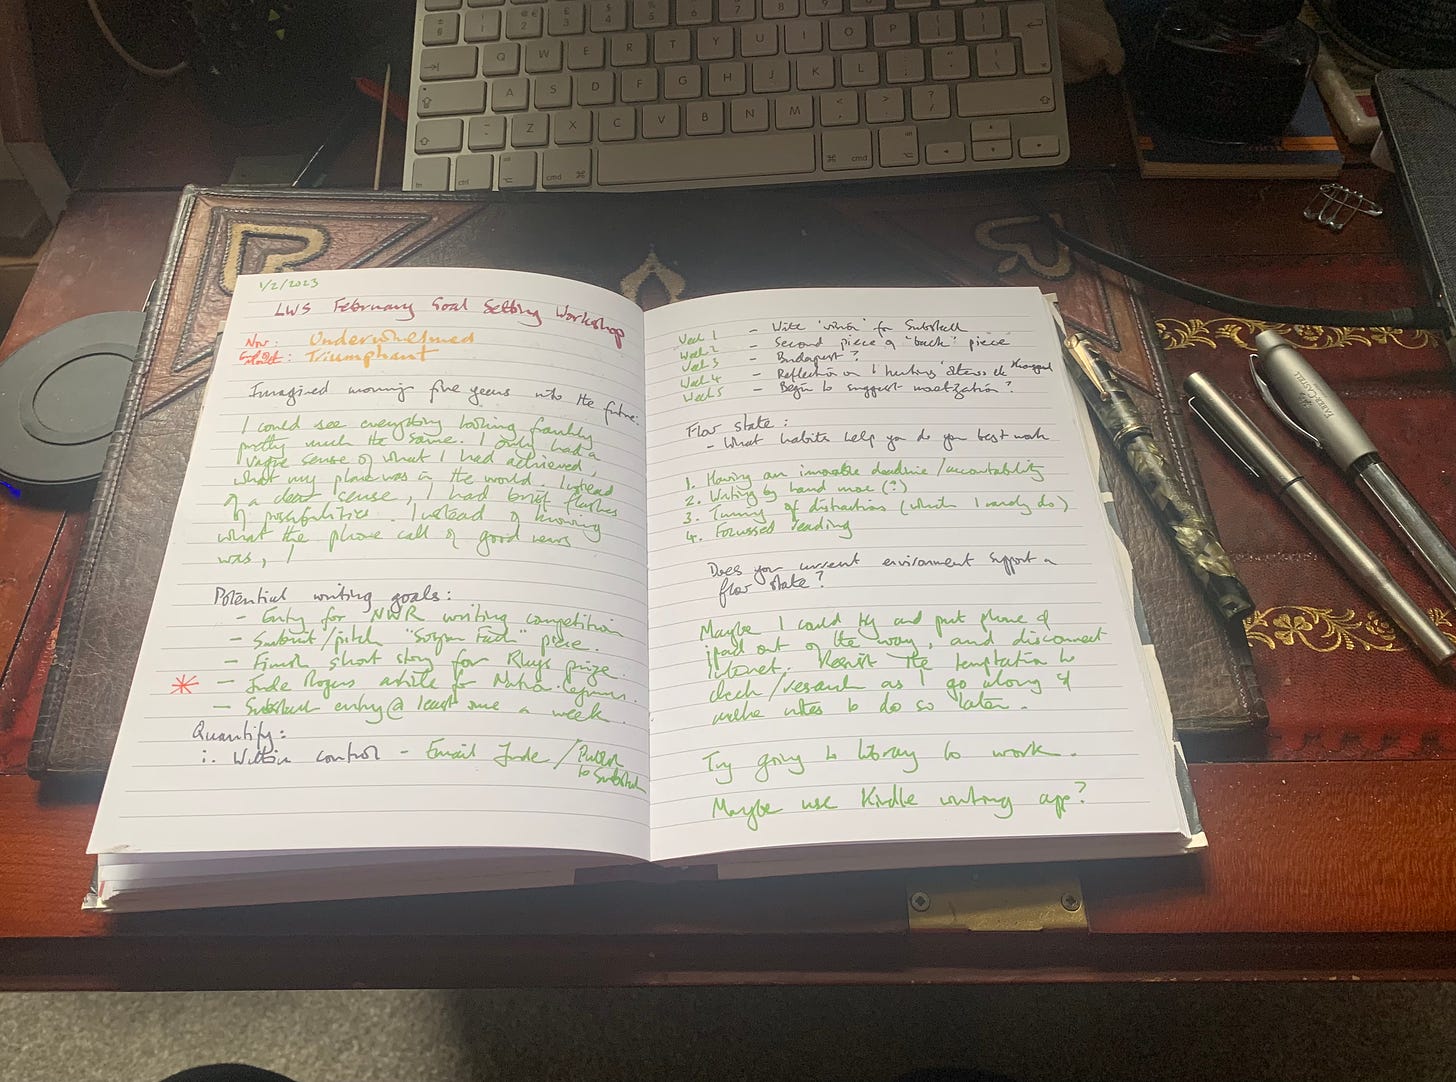 A notebook with handwritten notes in different coloured inks shirts on a desktop with pens and a computer keyboard.